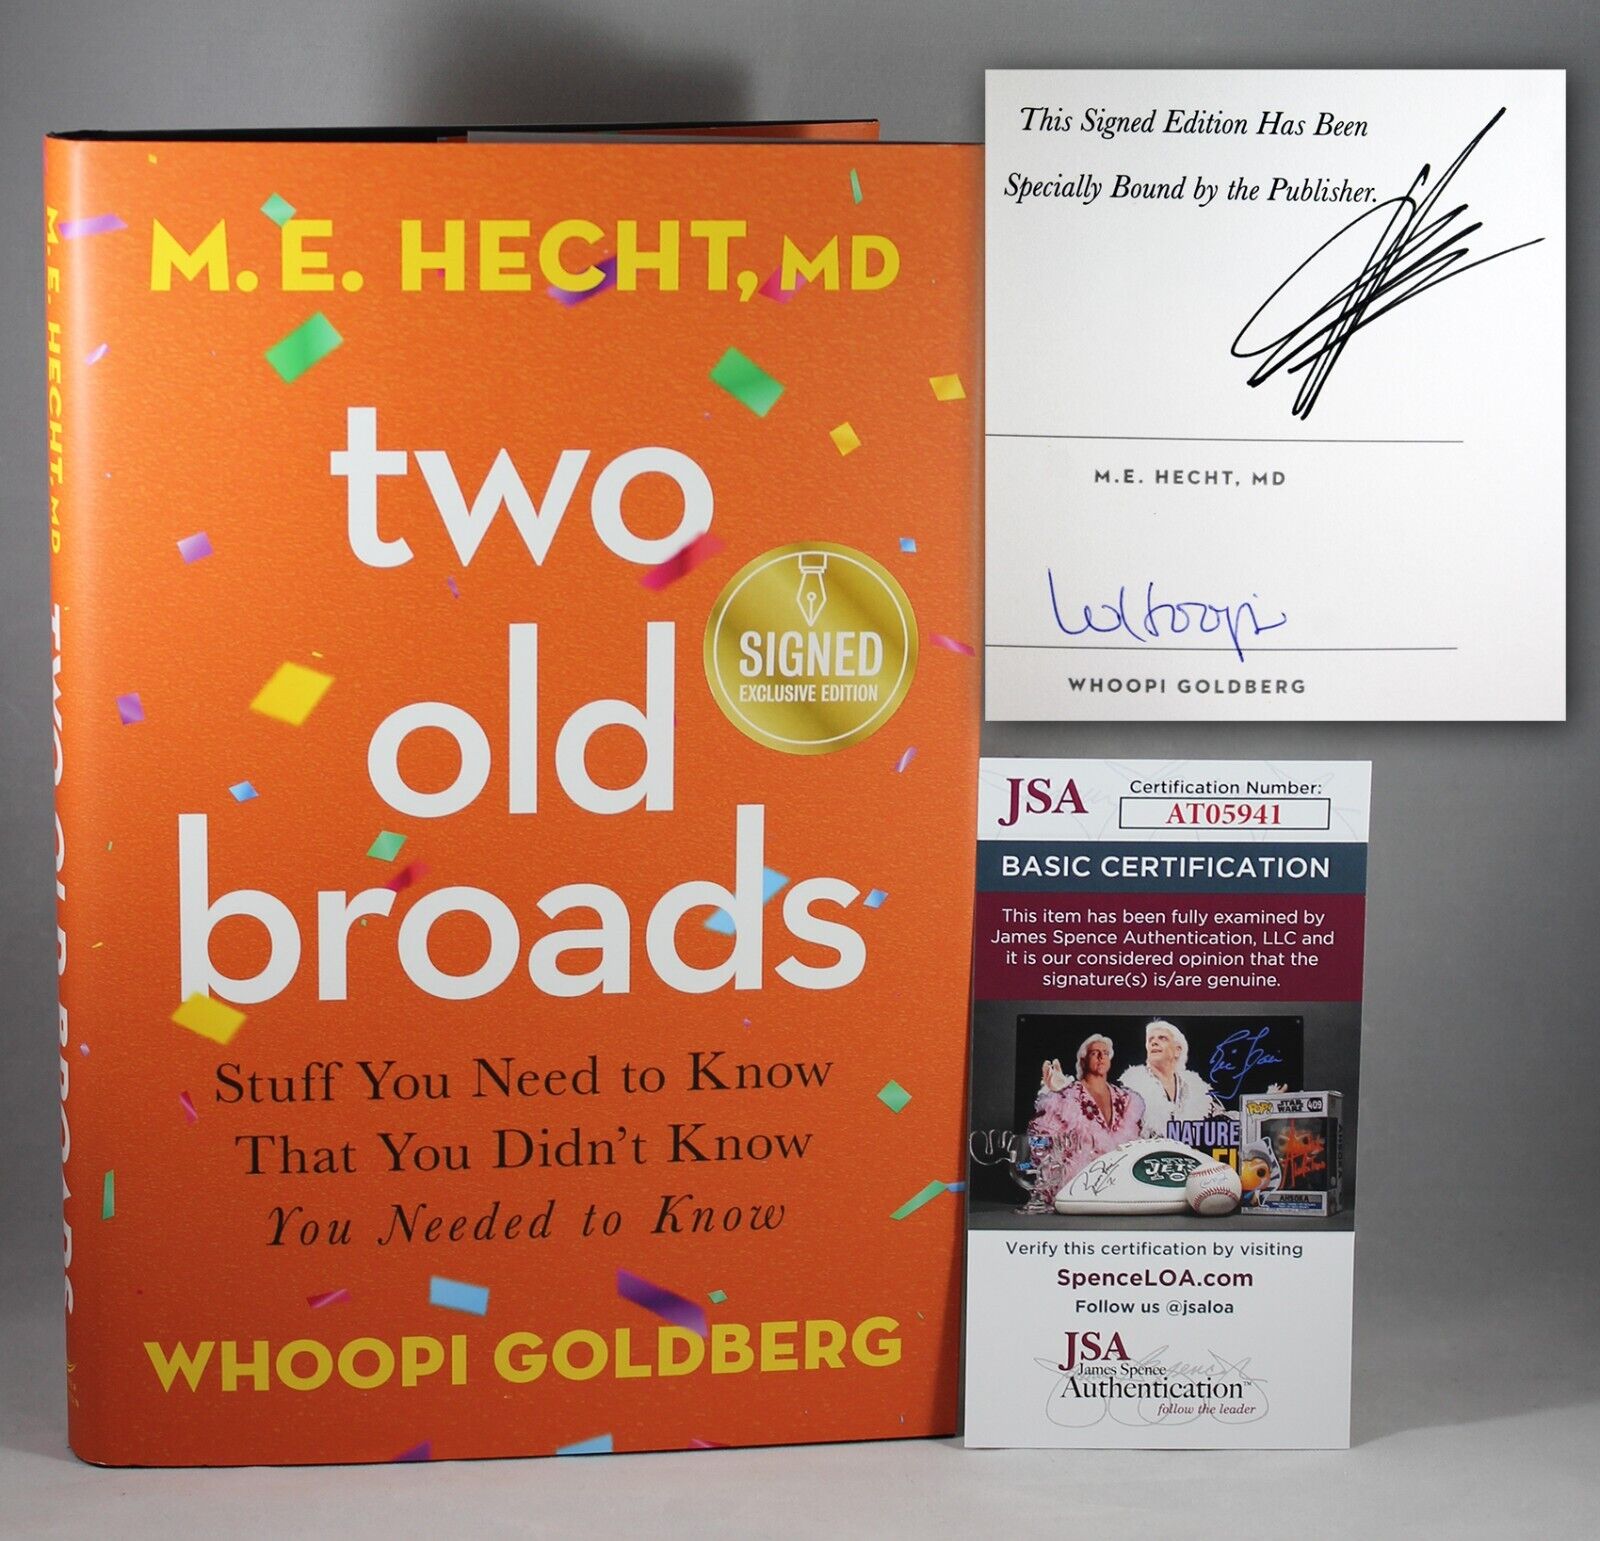 WHOOPI GOLDBERG SIGNED TWO OLD BROADS 1ST EDITION HARDCOVER BOOK AUTO +JSA COA